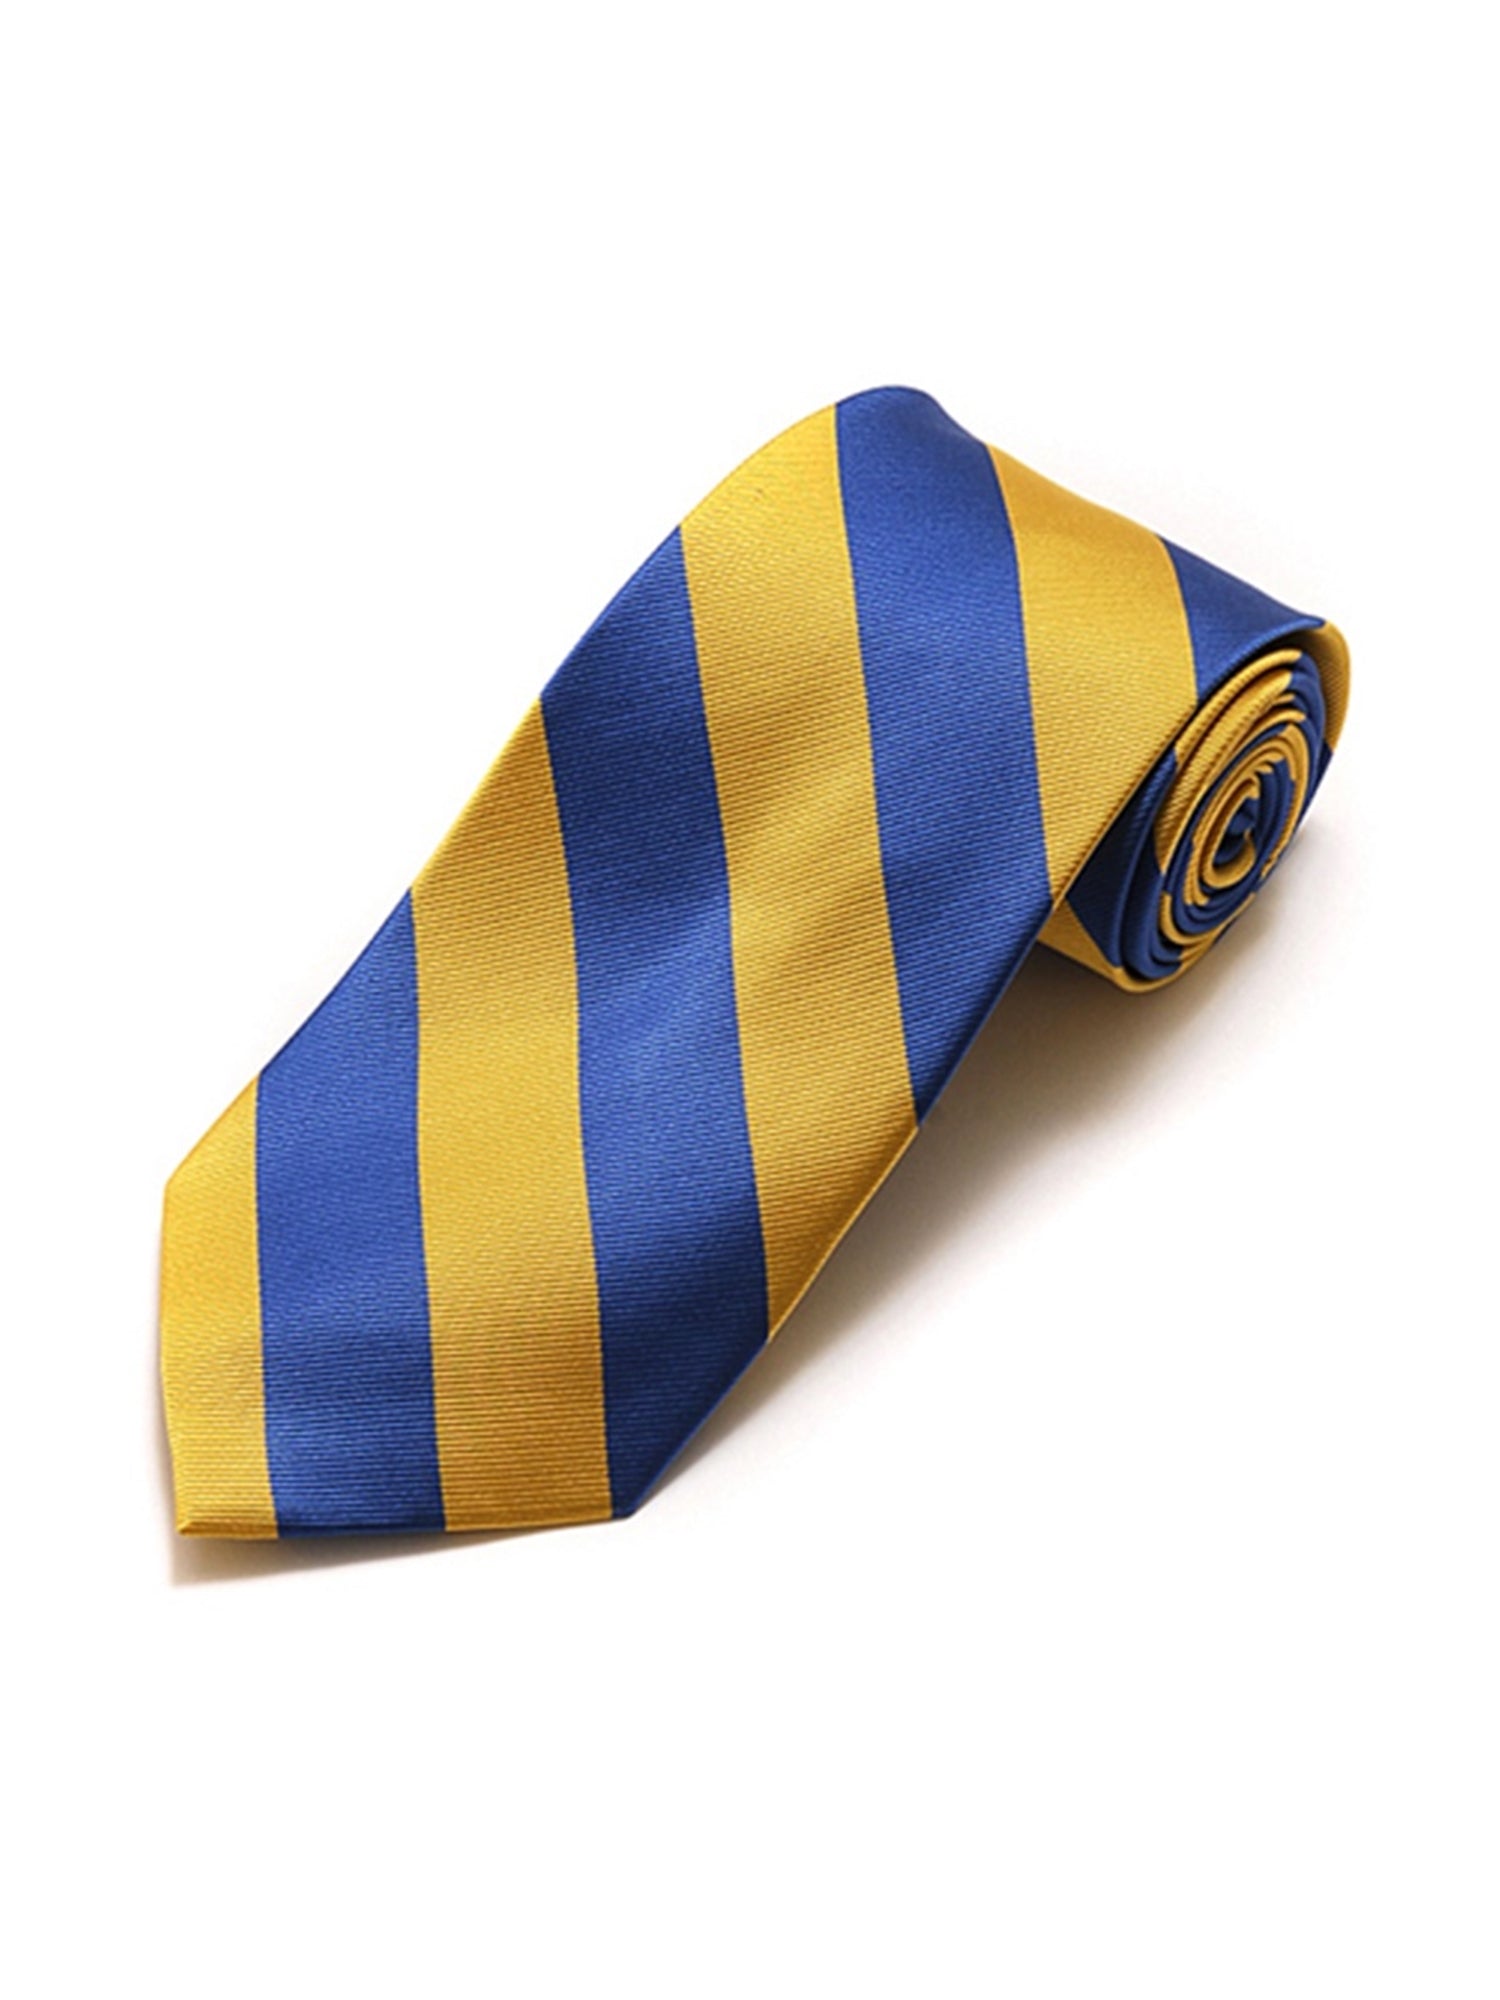 Men's College Striped Colored Silk Long Or X-Long Neck Tie Neck Tie TheDapperTie Blue & Gold 57" long & 3.25" wide 